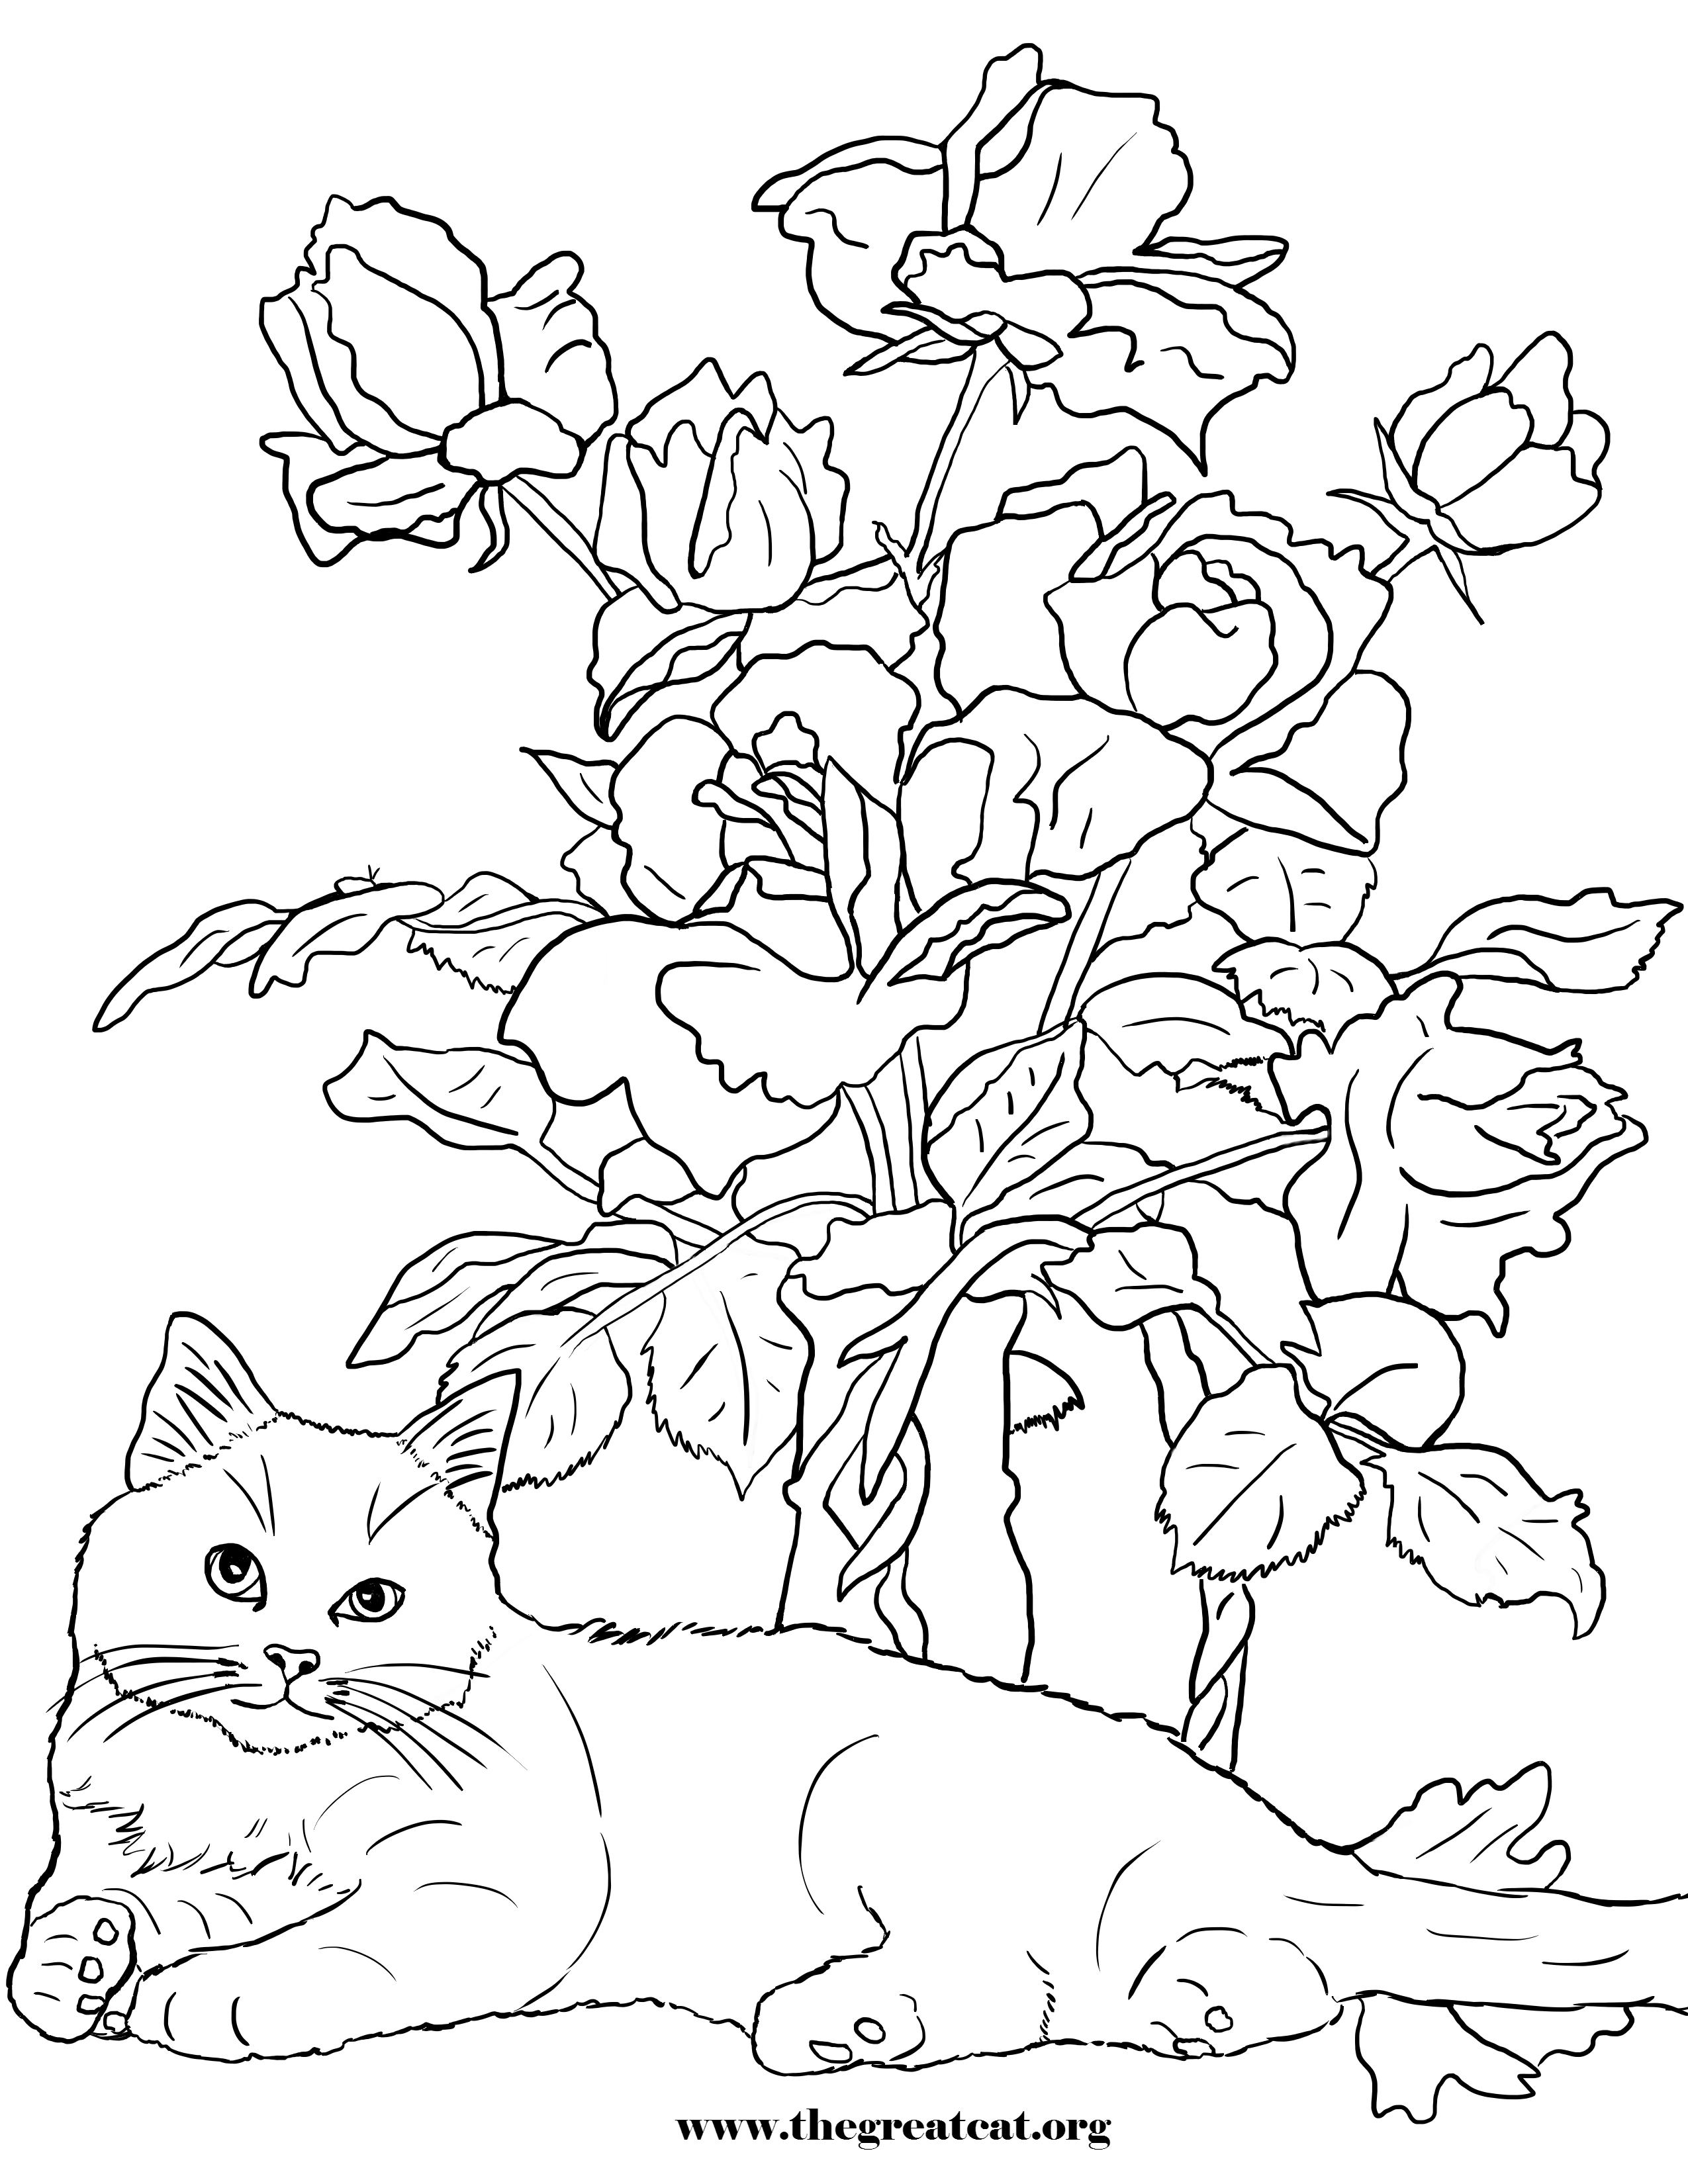 Cats And Flowers Coloring Book Cat Coloring Book Cat Coloring Page Coloring Books